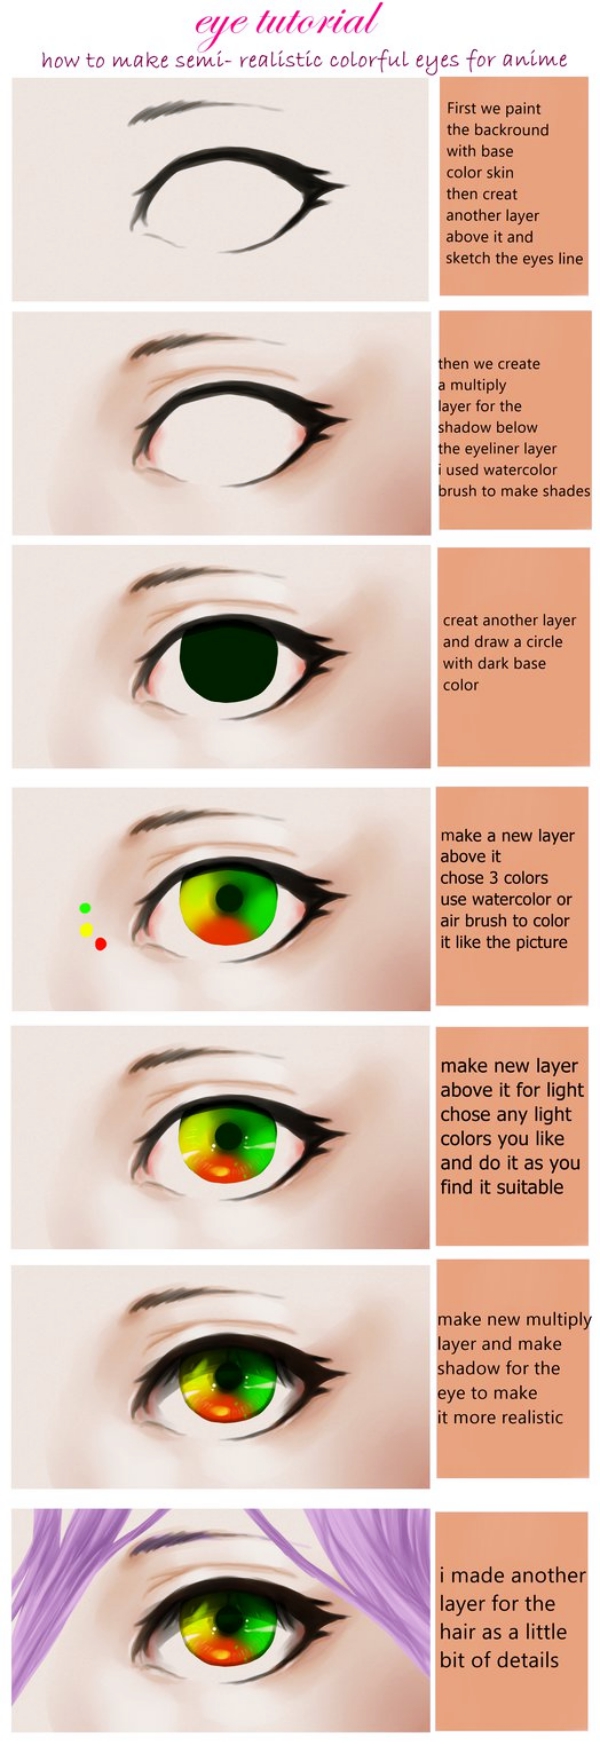 How To Paint An Eye 25 Amazing Tutorials Bored Art Faber castell polychromos 120 color pencils and markers paper : how to paint an eye 25 amazing